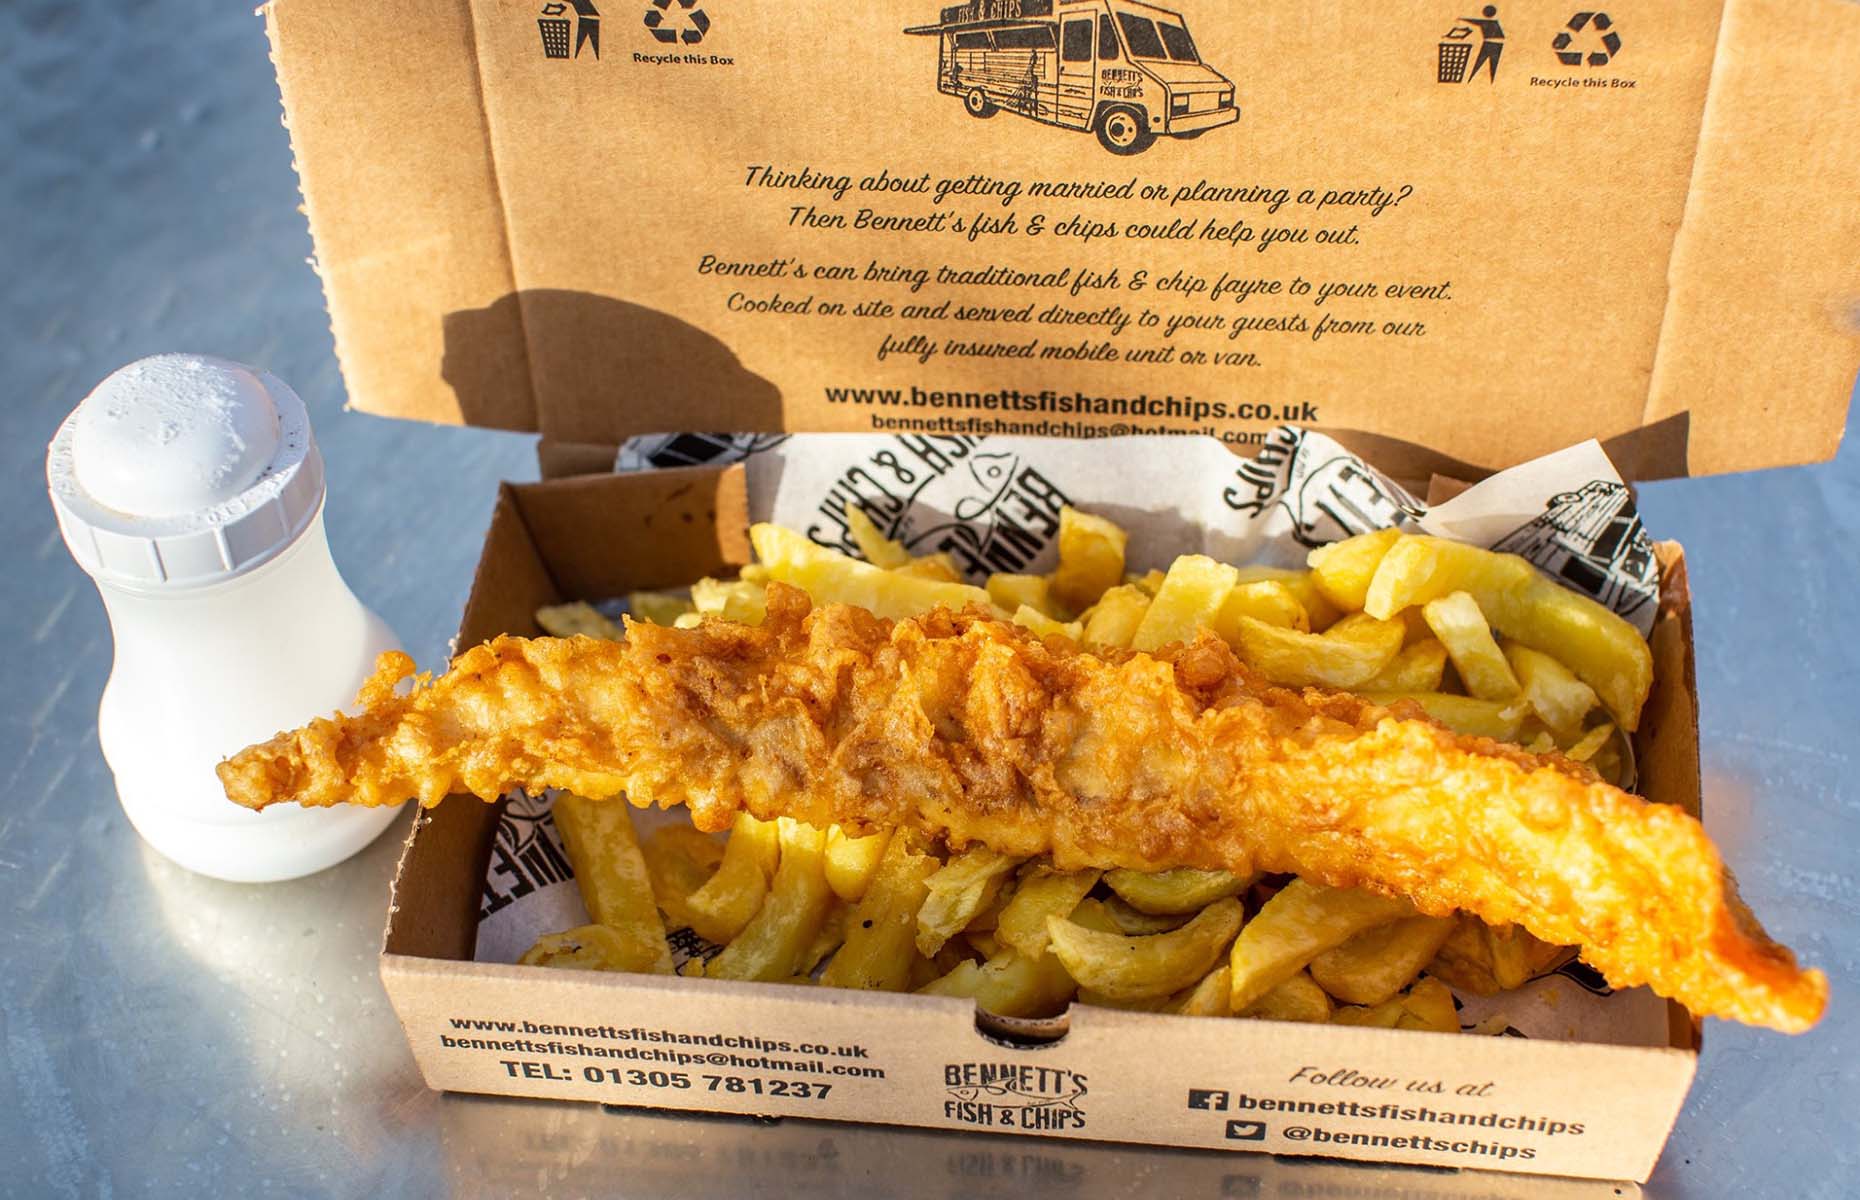 Bennett's Fish and Chips in Weymouth (Image: Bennett's Fish and Chips/Facebook)